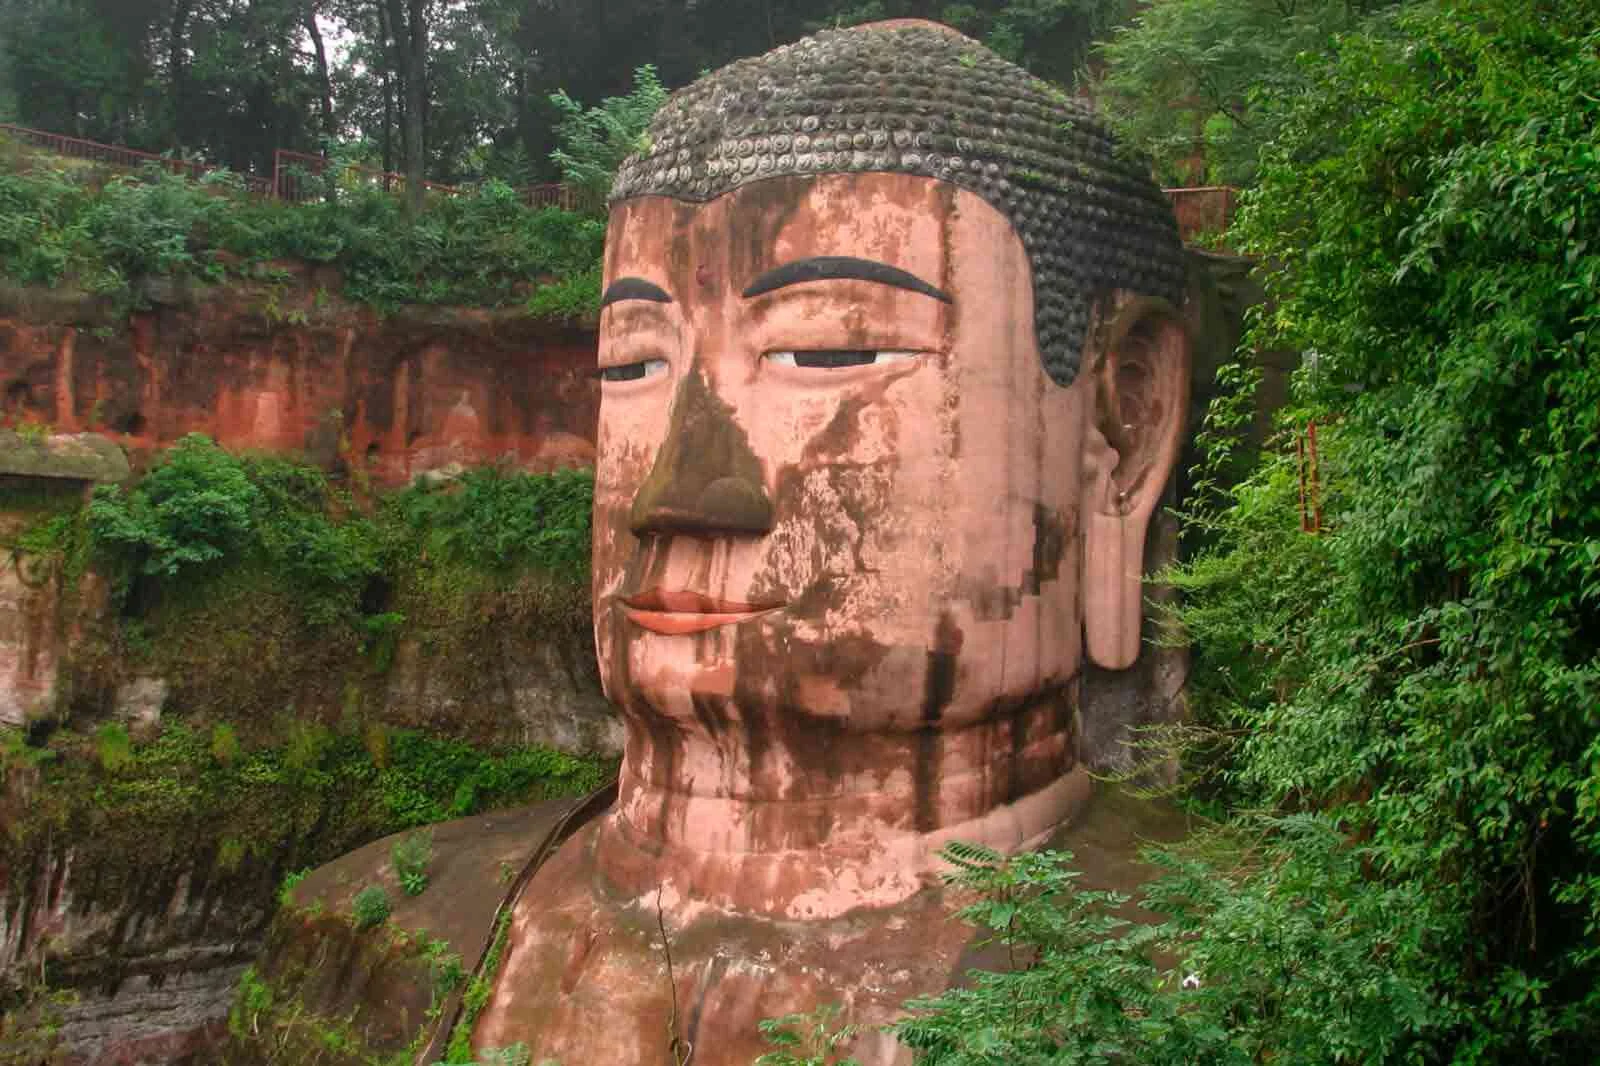 The statue of Buddha in Sichuan province in China, located near the city of Leshan.